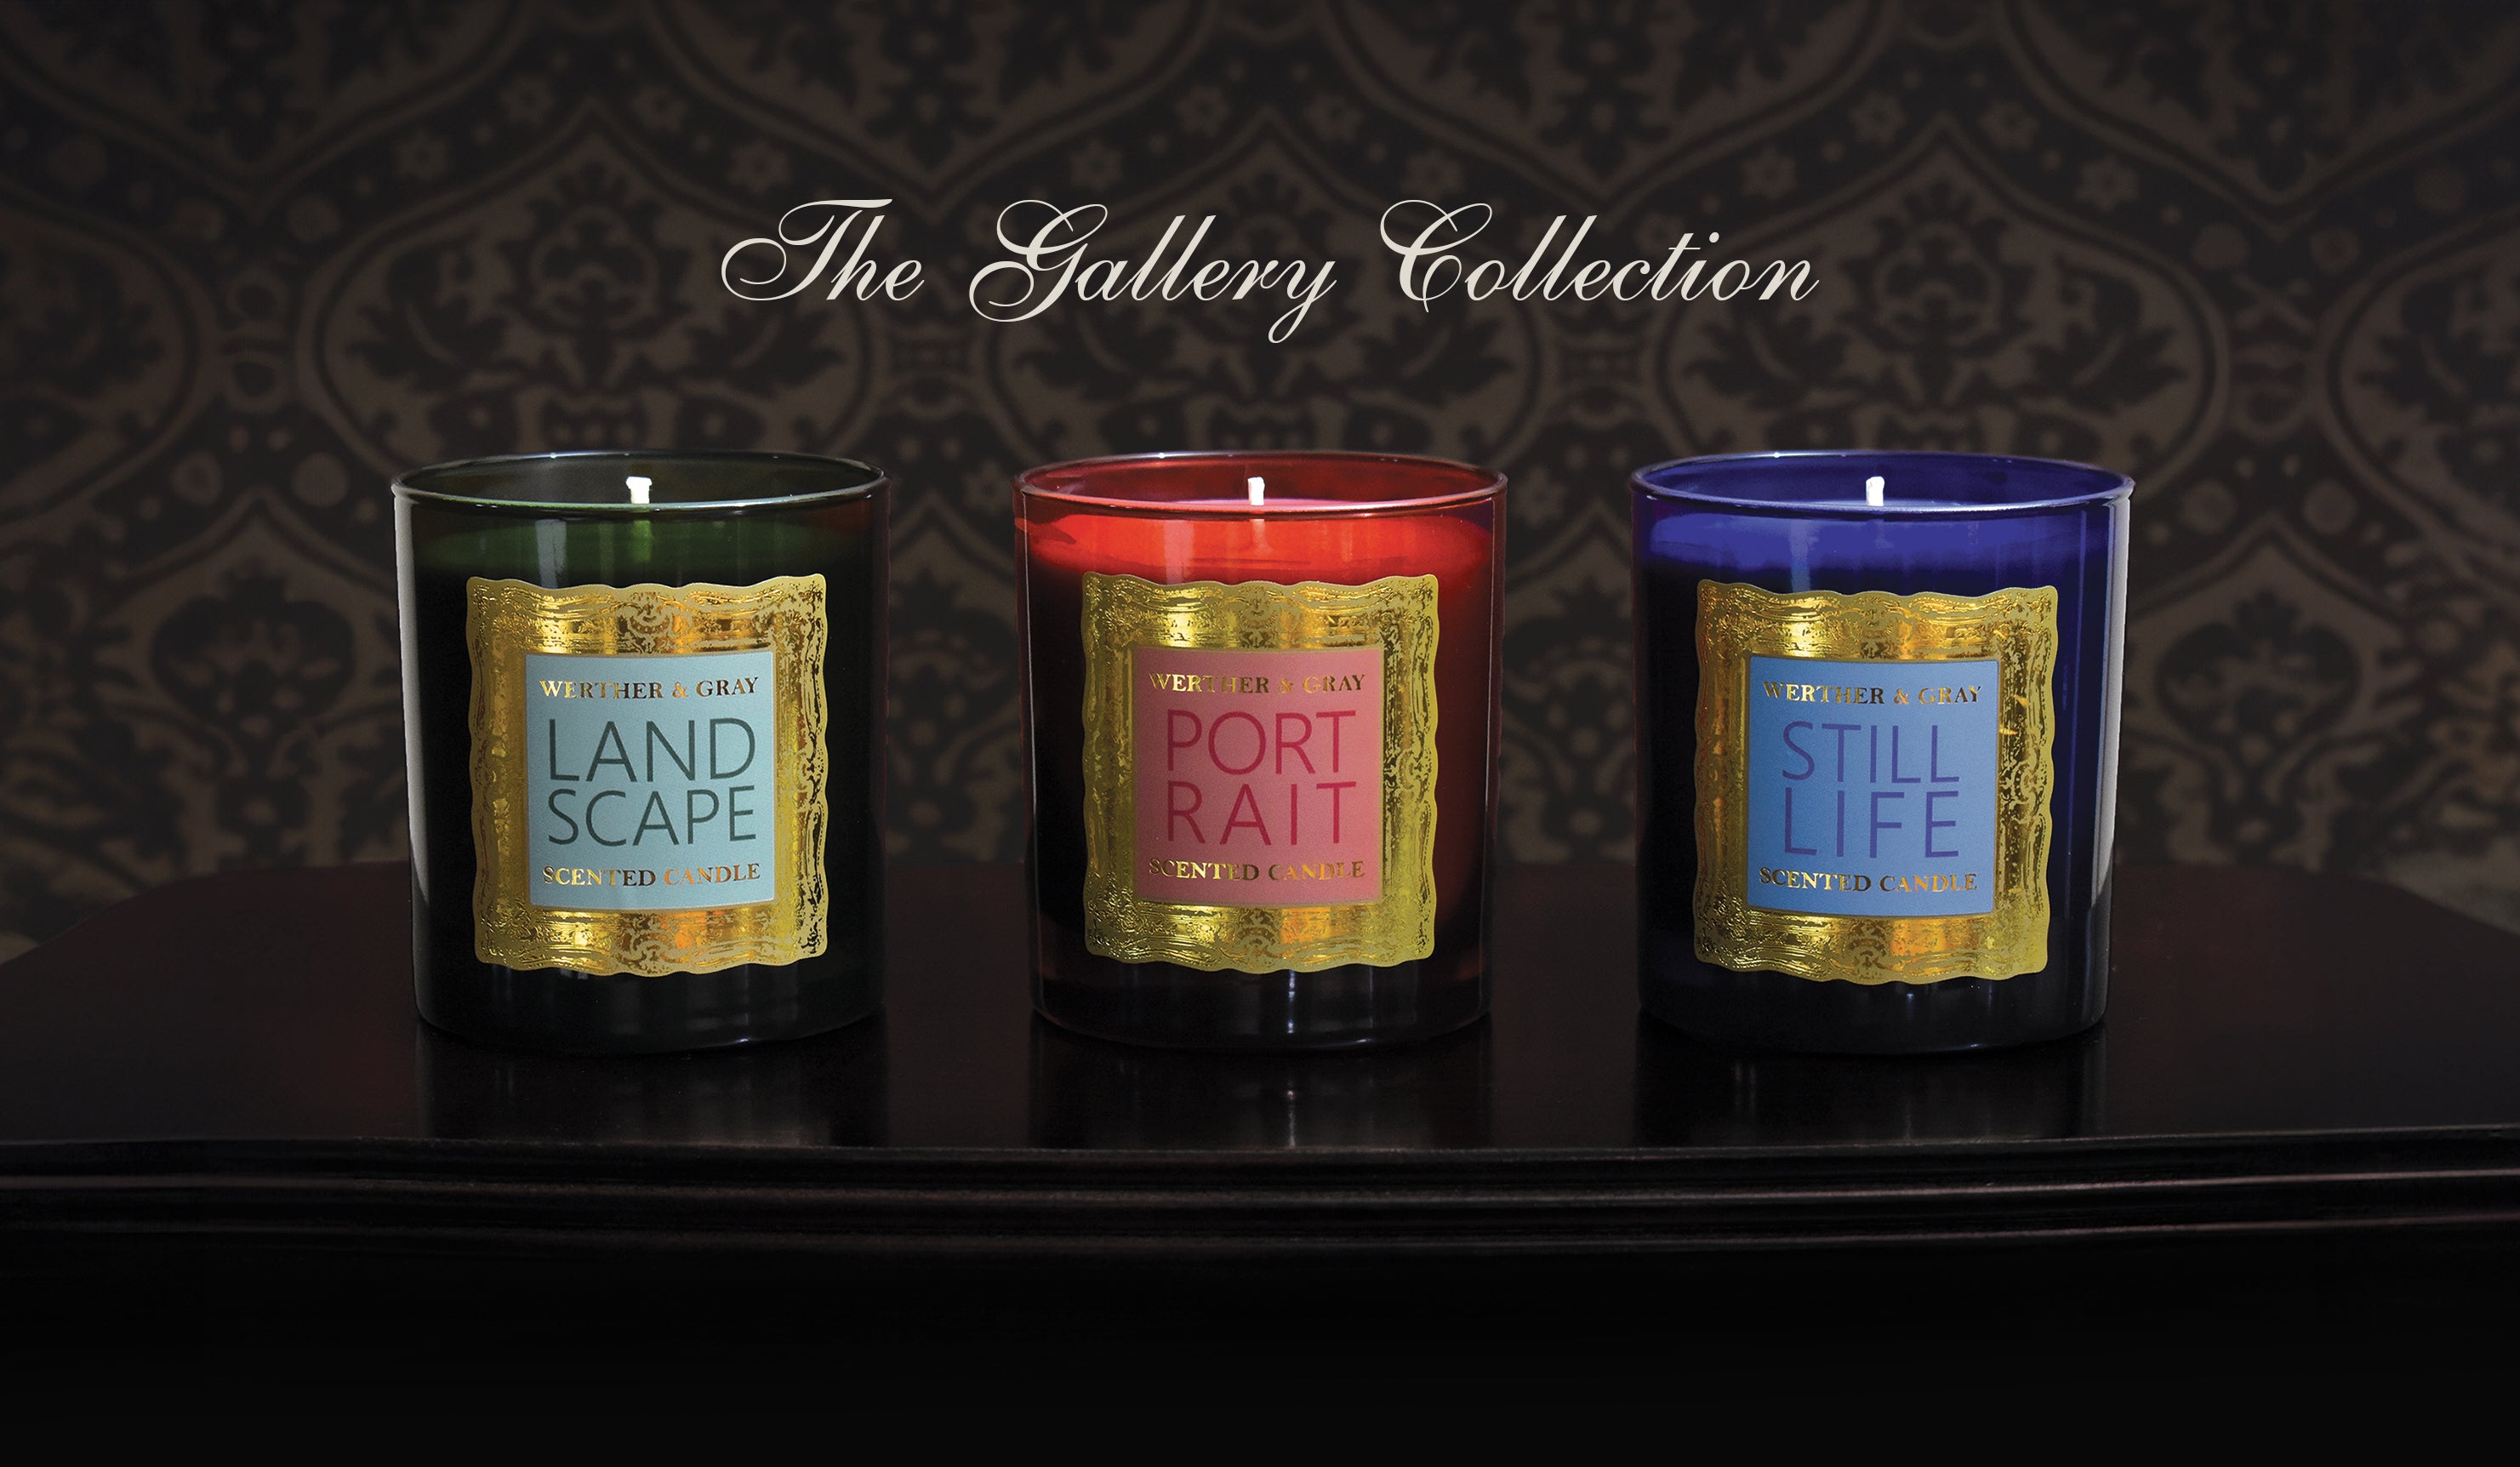 The Gallery Collection, three scented candles: Landscape, Portrait, and Still Life